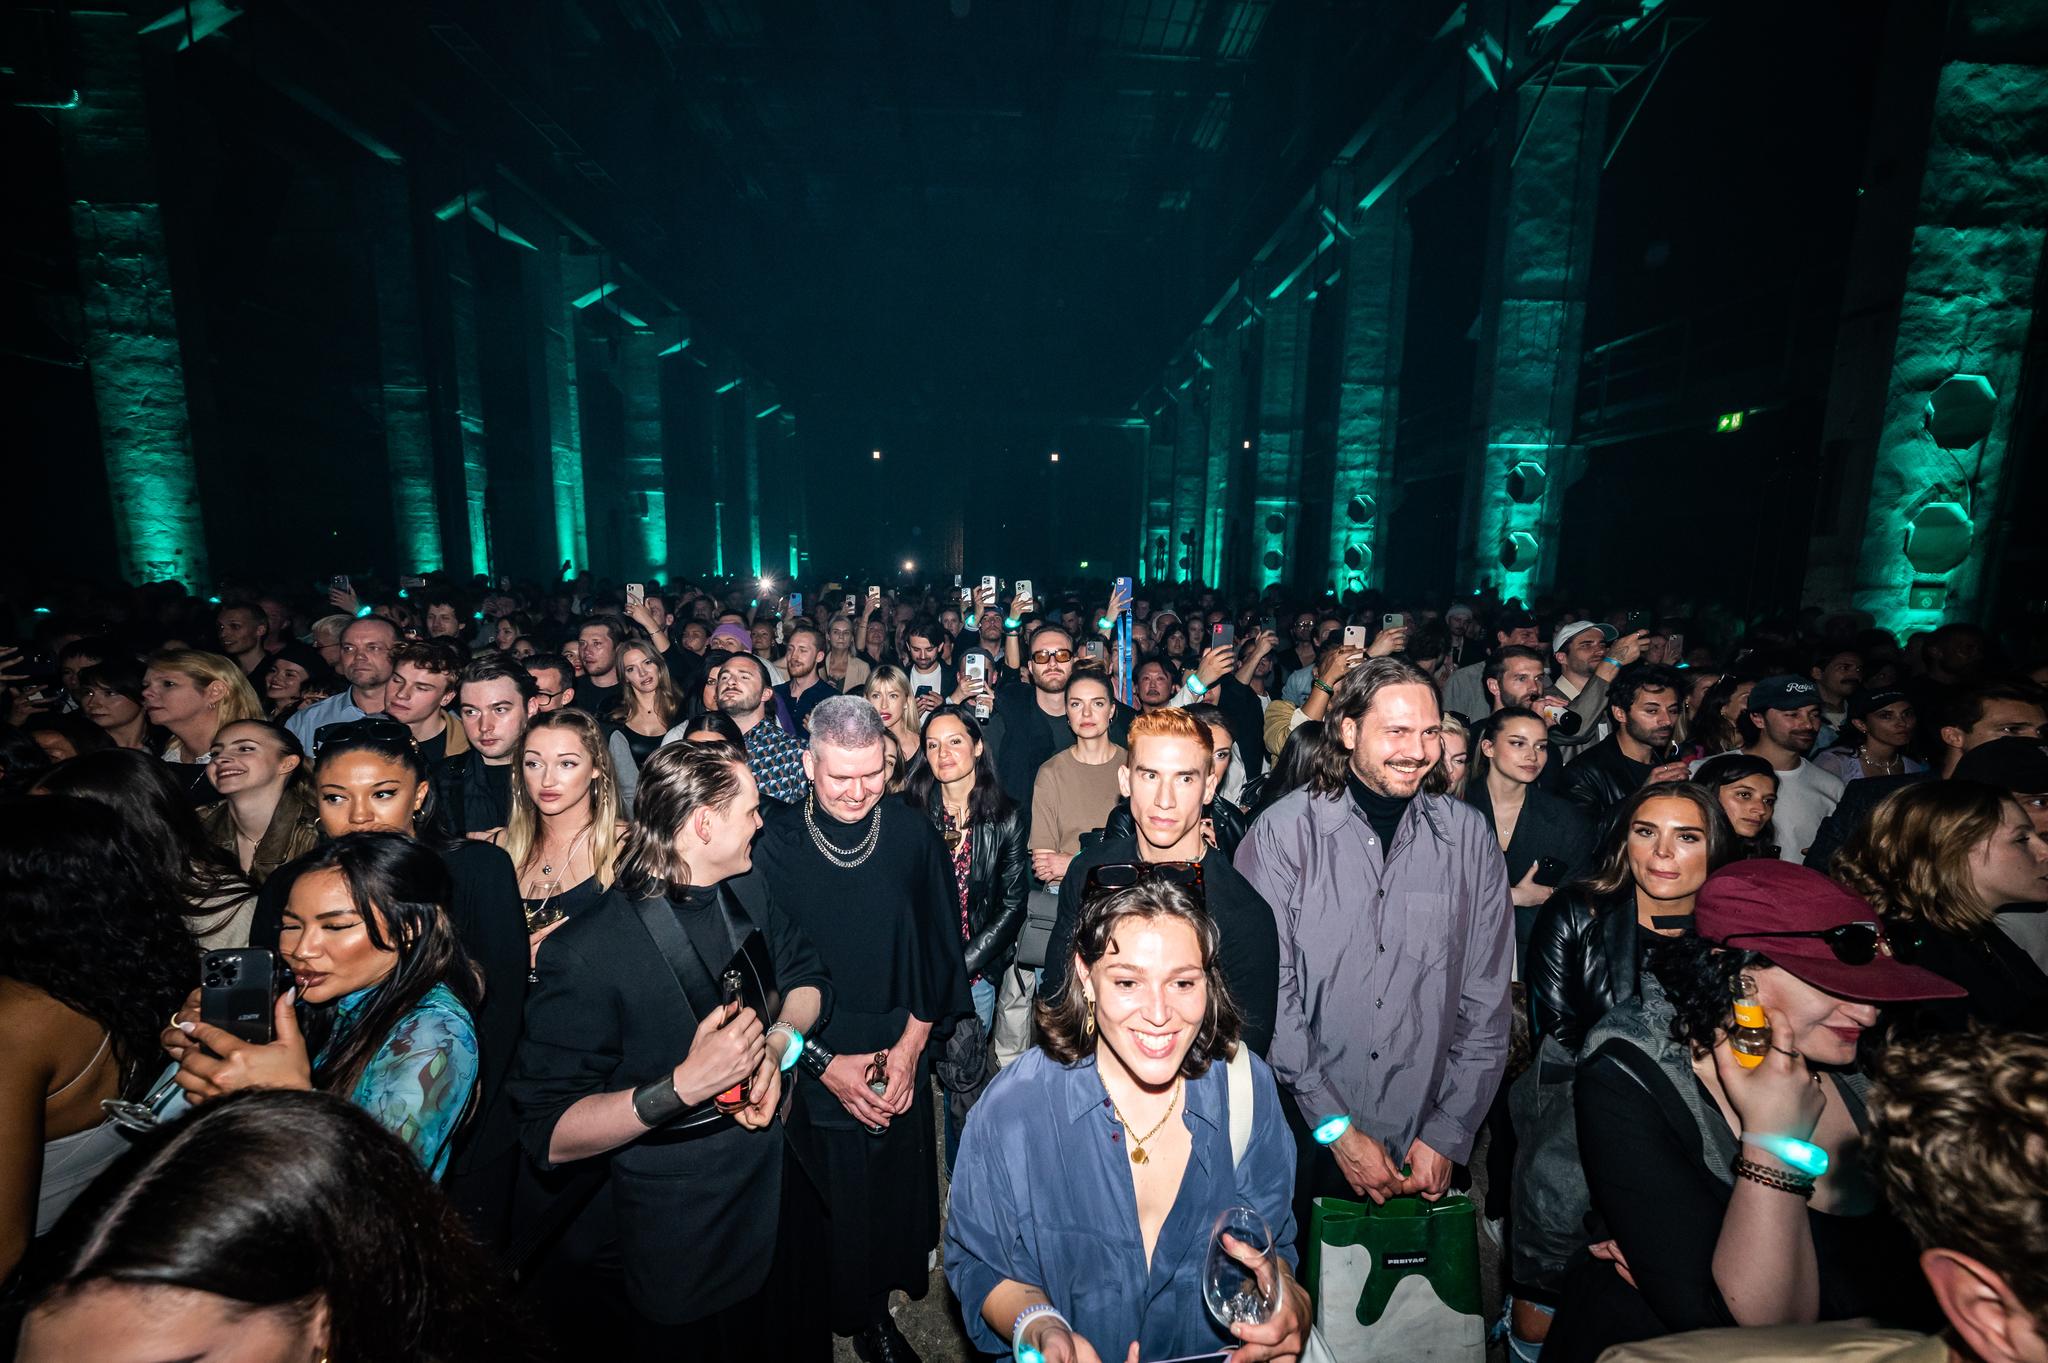 Frontal shot of Berlin's Kraftwerk filled with guests at the Battle Royal Studios event for a fortune 500 client